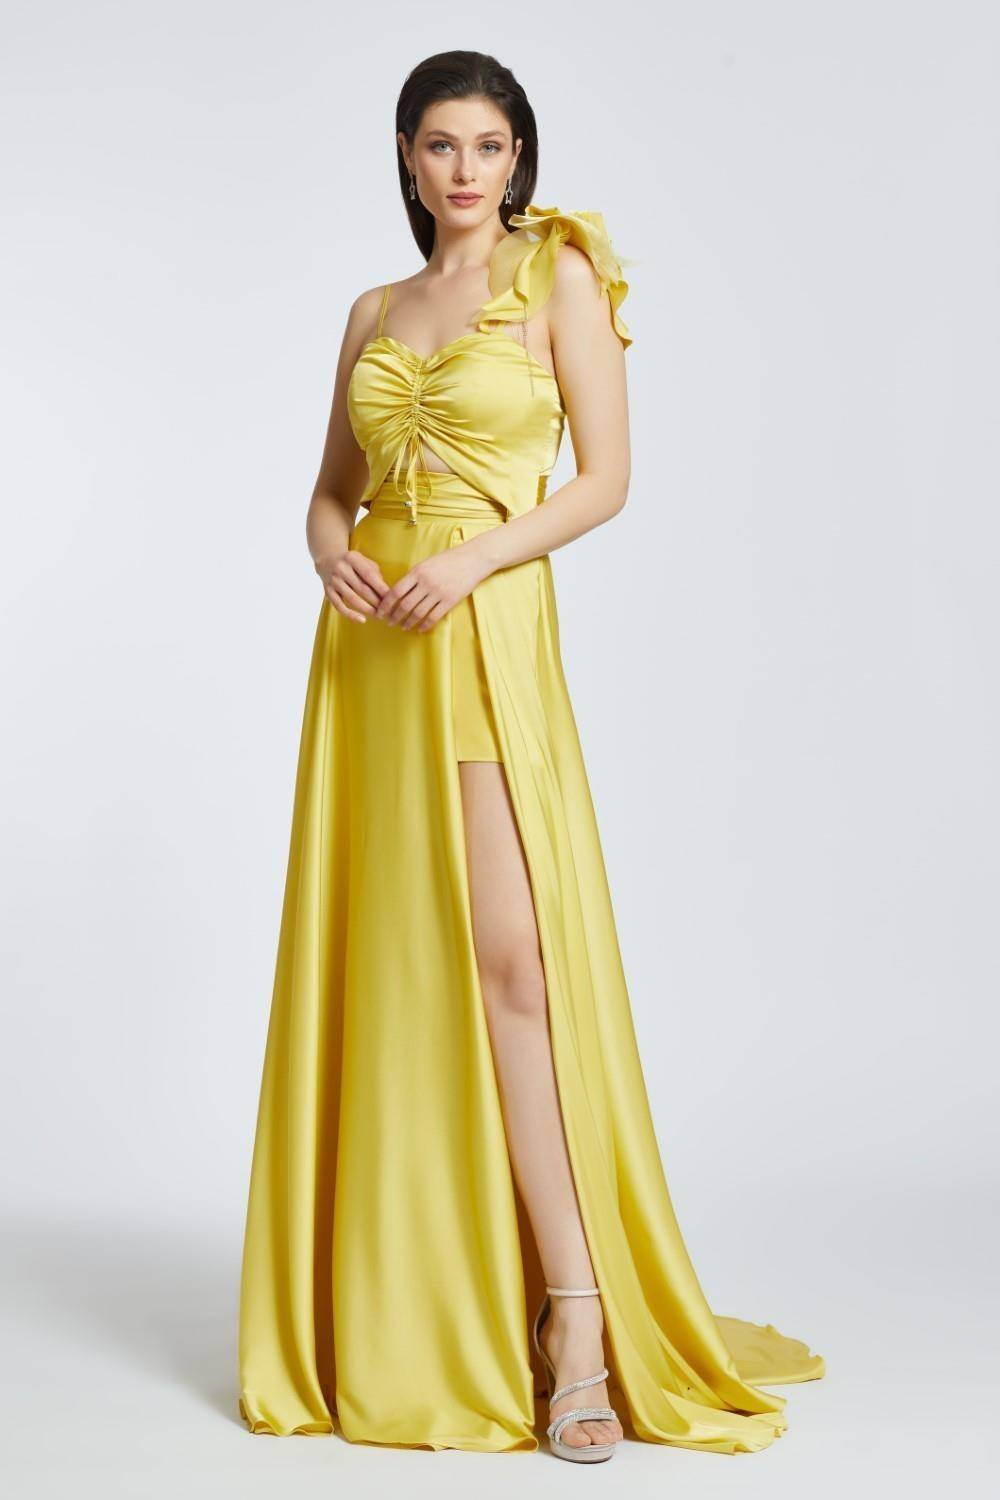 Rope Strappy Slit Long Evening Dress